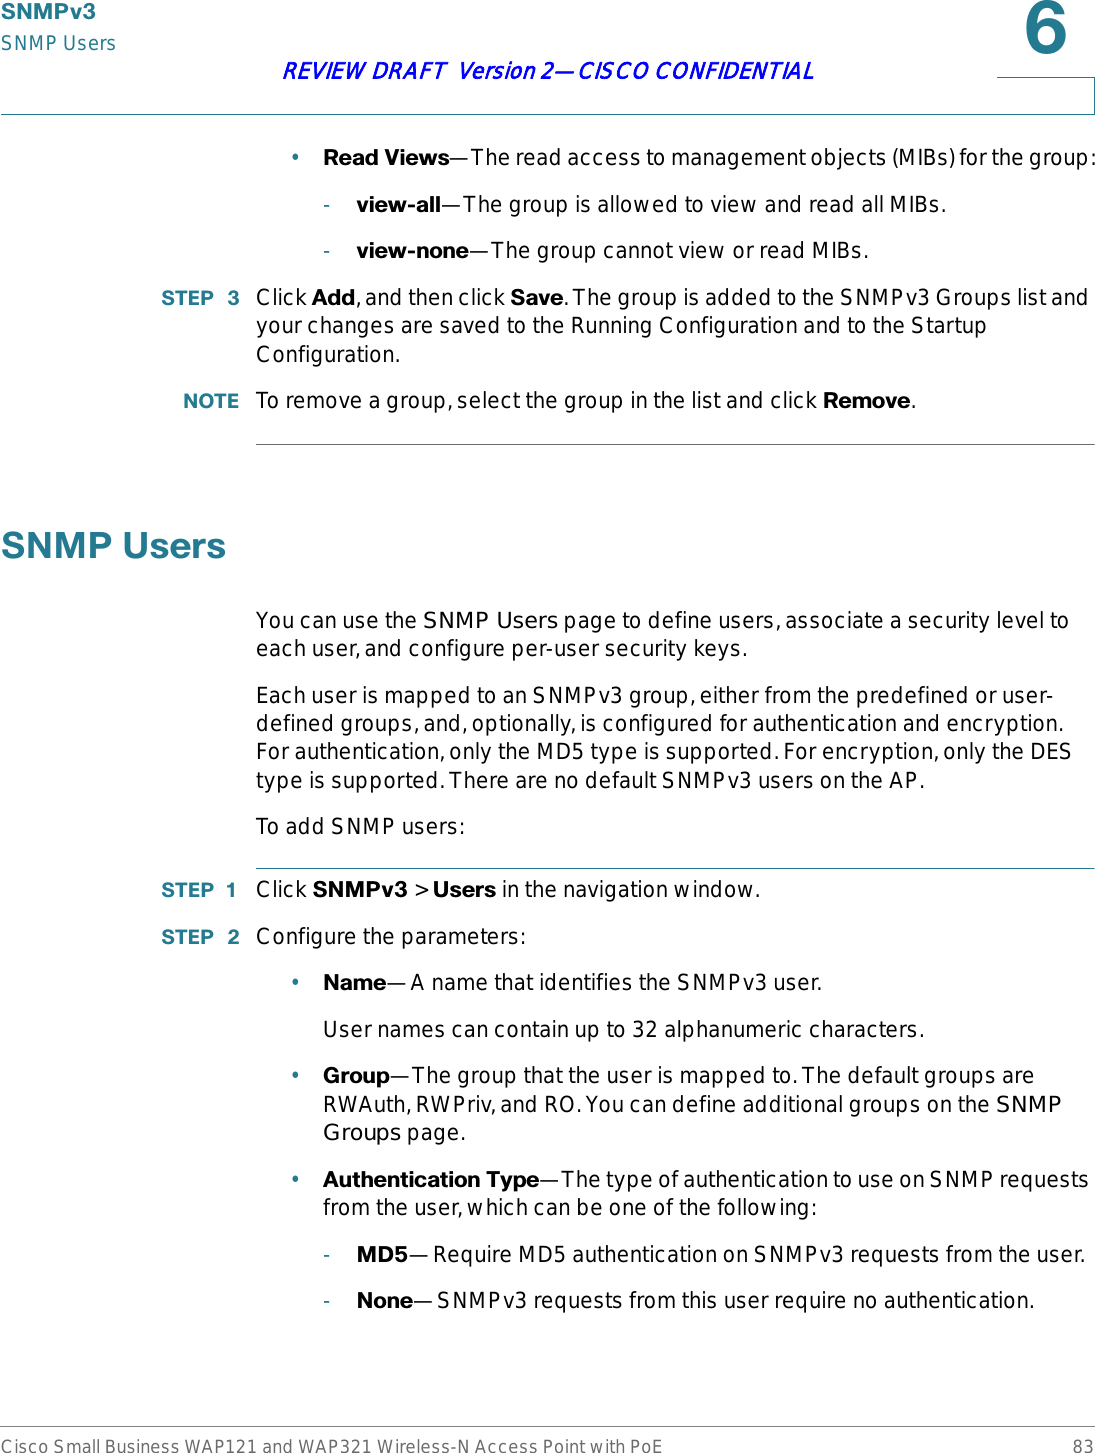 6103YSNMP UsersCisco Small Business WAP121 and WAP321 Wireless-N Access Point with PoE 83REVIEW DRAFT  Version 2—CISCO CONFIDENTIAL•5HDG9LHZV—The read access to management objects (MIBs) for the group:-YLHZDOO—The group is allowed to view and read all MIBs.-YLHZQRQH—The group cannot view or read MIBs.67(3  Click $GG, and then click 6DYH. The group is added to the SNMPv3 Groups list and your changes are saved to the Running Configuration and to the Startup Configuration.127( To remove a group, select the group in the list and click 5HPRYH.61038VHUVYou can use the SNMP Users page to define users, associate a security level to each user, and configure per-user security keys.Each user is mapped to an SNMPv3 group, either from the predefined or user-defined groups, and, optionally, is configured for authentication and encryption. For authentication, only the MD5 type is supported. For encryption, only the DES type is supported. There are no default SNMPv3 users on the AP.To add SNMP users:67(3  Click 6103Y &gt; 8VHUV in the navigation window.67(3  Configure the parameters:•1DPH—A name that identifies the SNMPv3 user. User names can contain up to 32 alphanumeric characters.•*URXS—The group that the user is mapped to. The default groups are RWAuth, RWPriv, and RO. You can define additional groups on the SNMP Groups page.•$XWKHQWLFDWLRQ7\SH—The type of authentication to use on SNMP requests from the user, which can be one of the following:-0&apos;—Require MD5 authentication on SNMPv3 requests from the user.-1RQH—SNMPv3 requests from this user require no authentication.